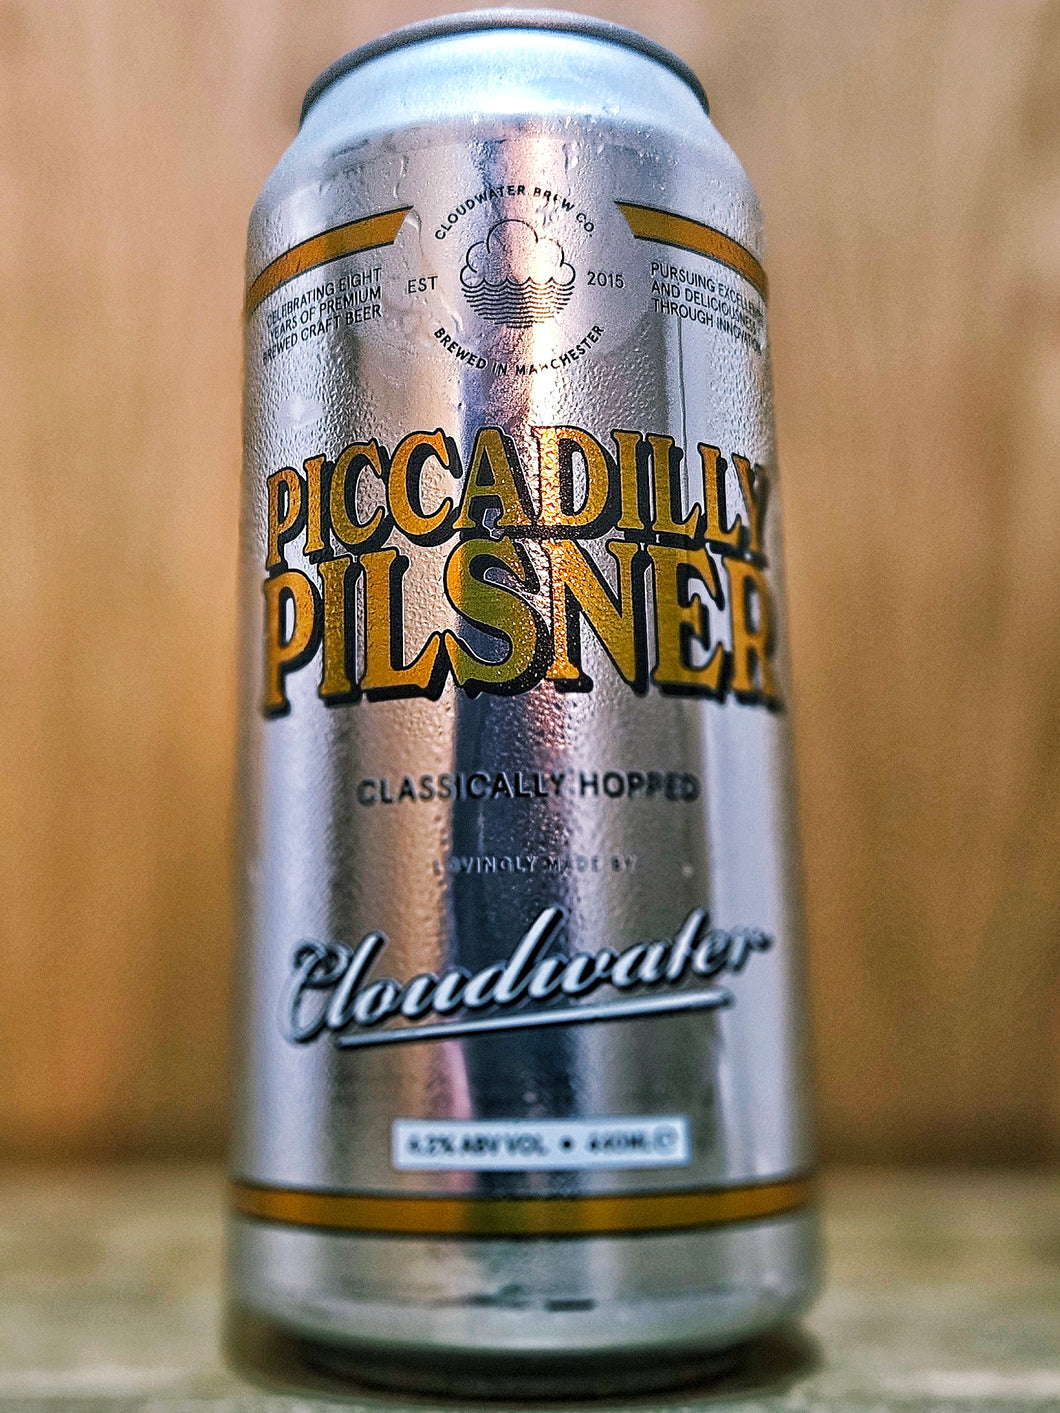 Cloudwater - Piccadilly Pilsner